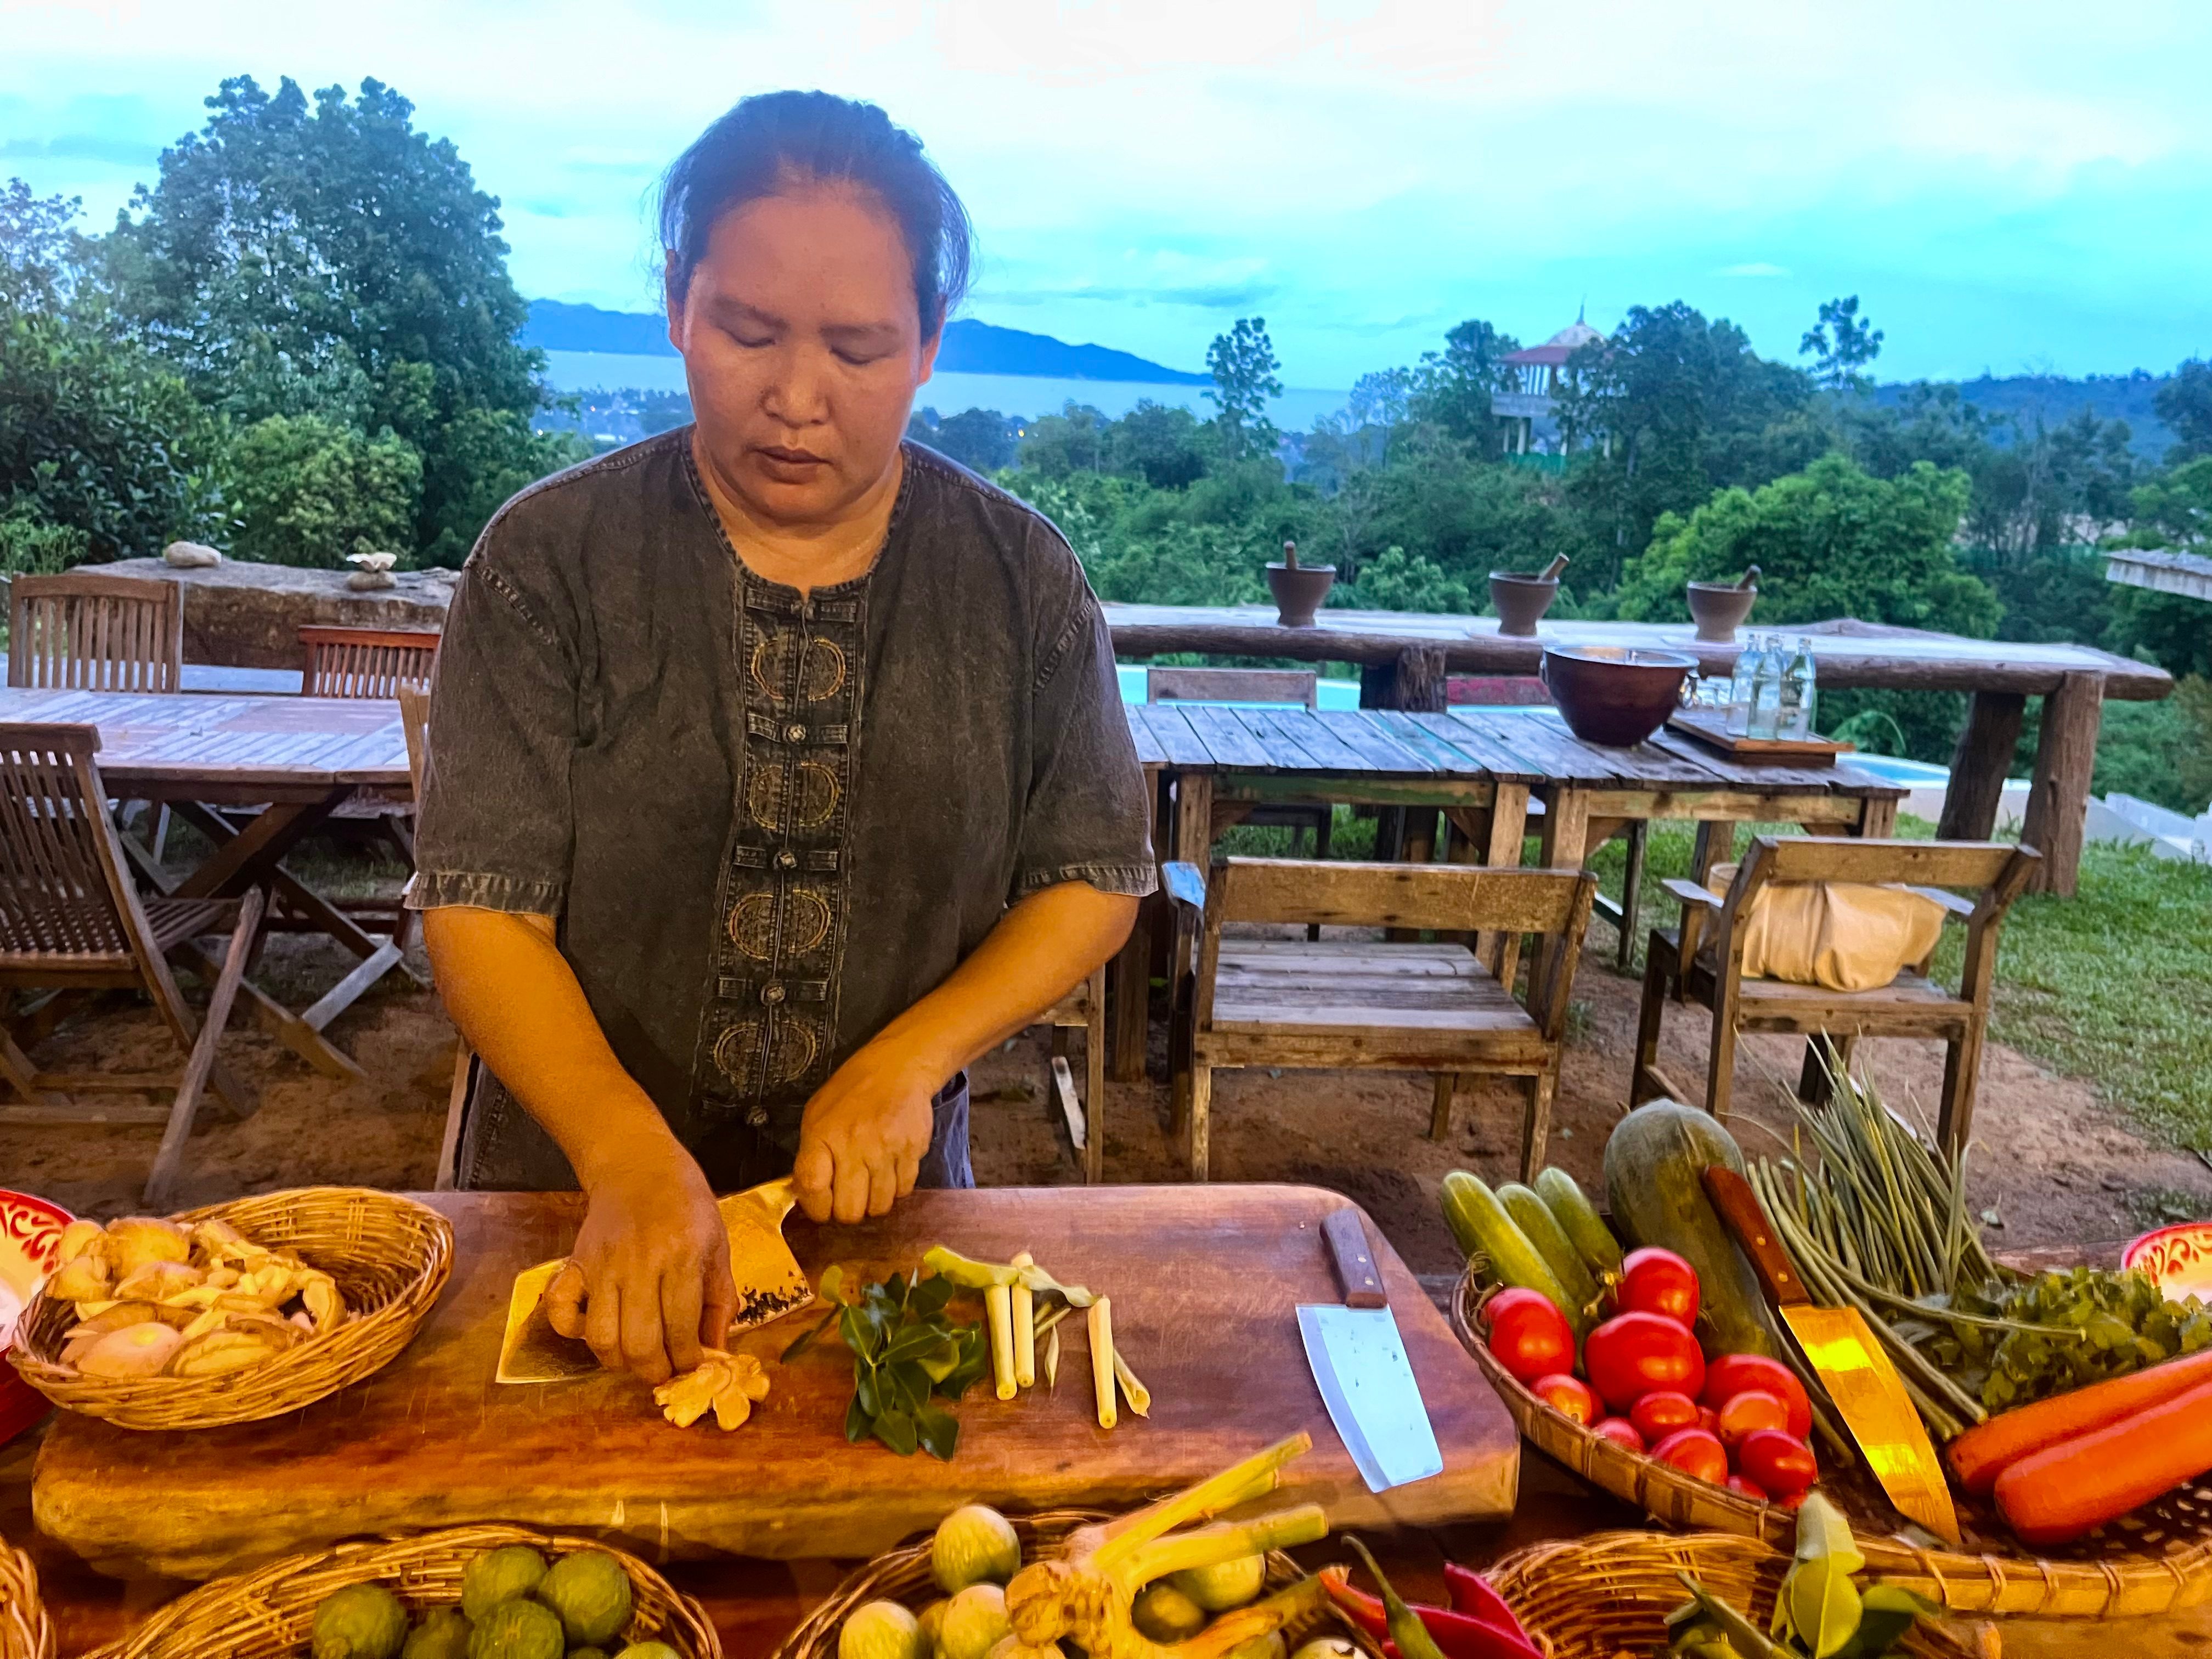 Lin Rattana chops ingredients at her Jungle Kitchen cooking school in Koh Samui, Thailand. Photo: Kylie Knott